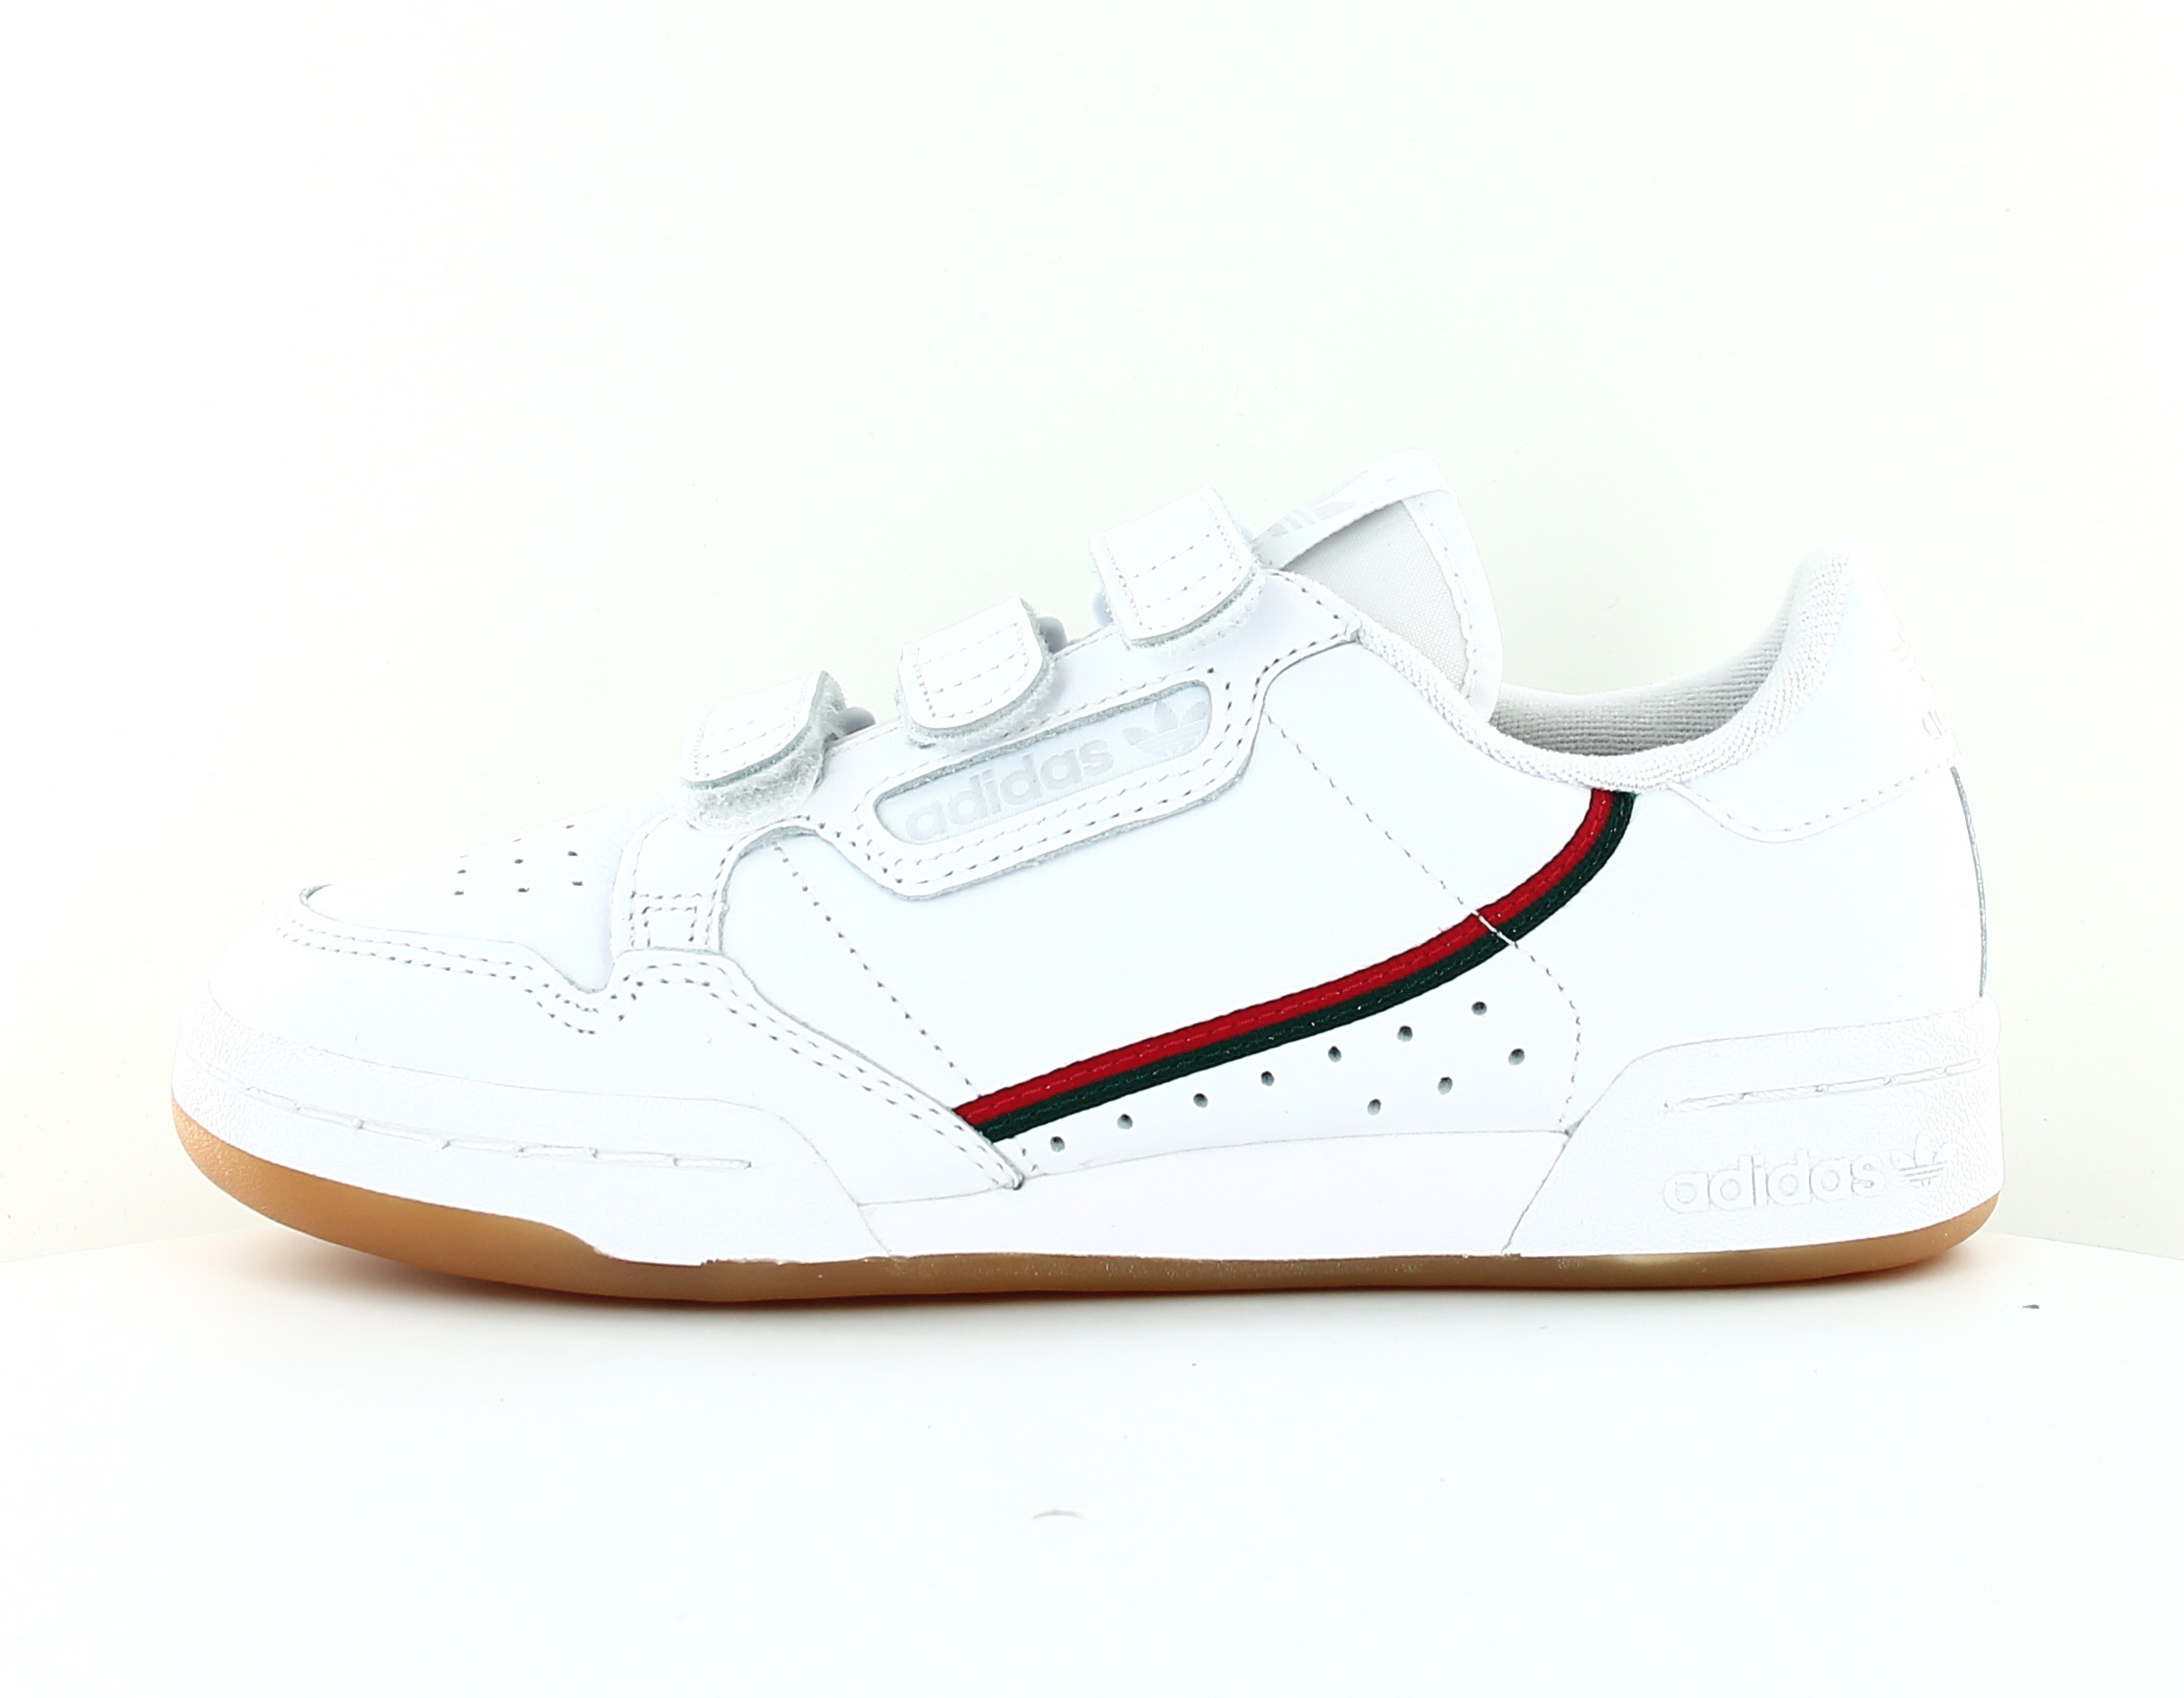 Adidas Continental 80 strap Blanc rouge vert gomme EE5359